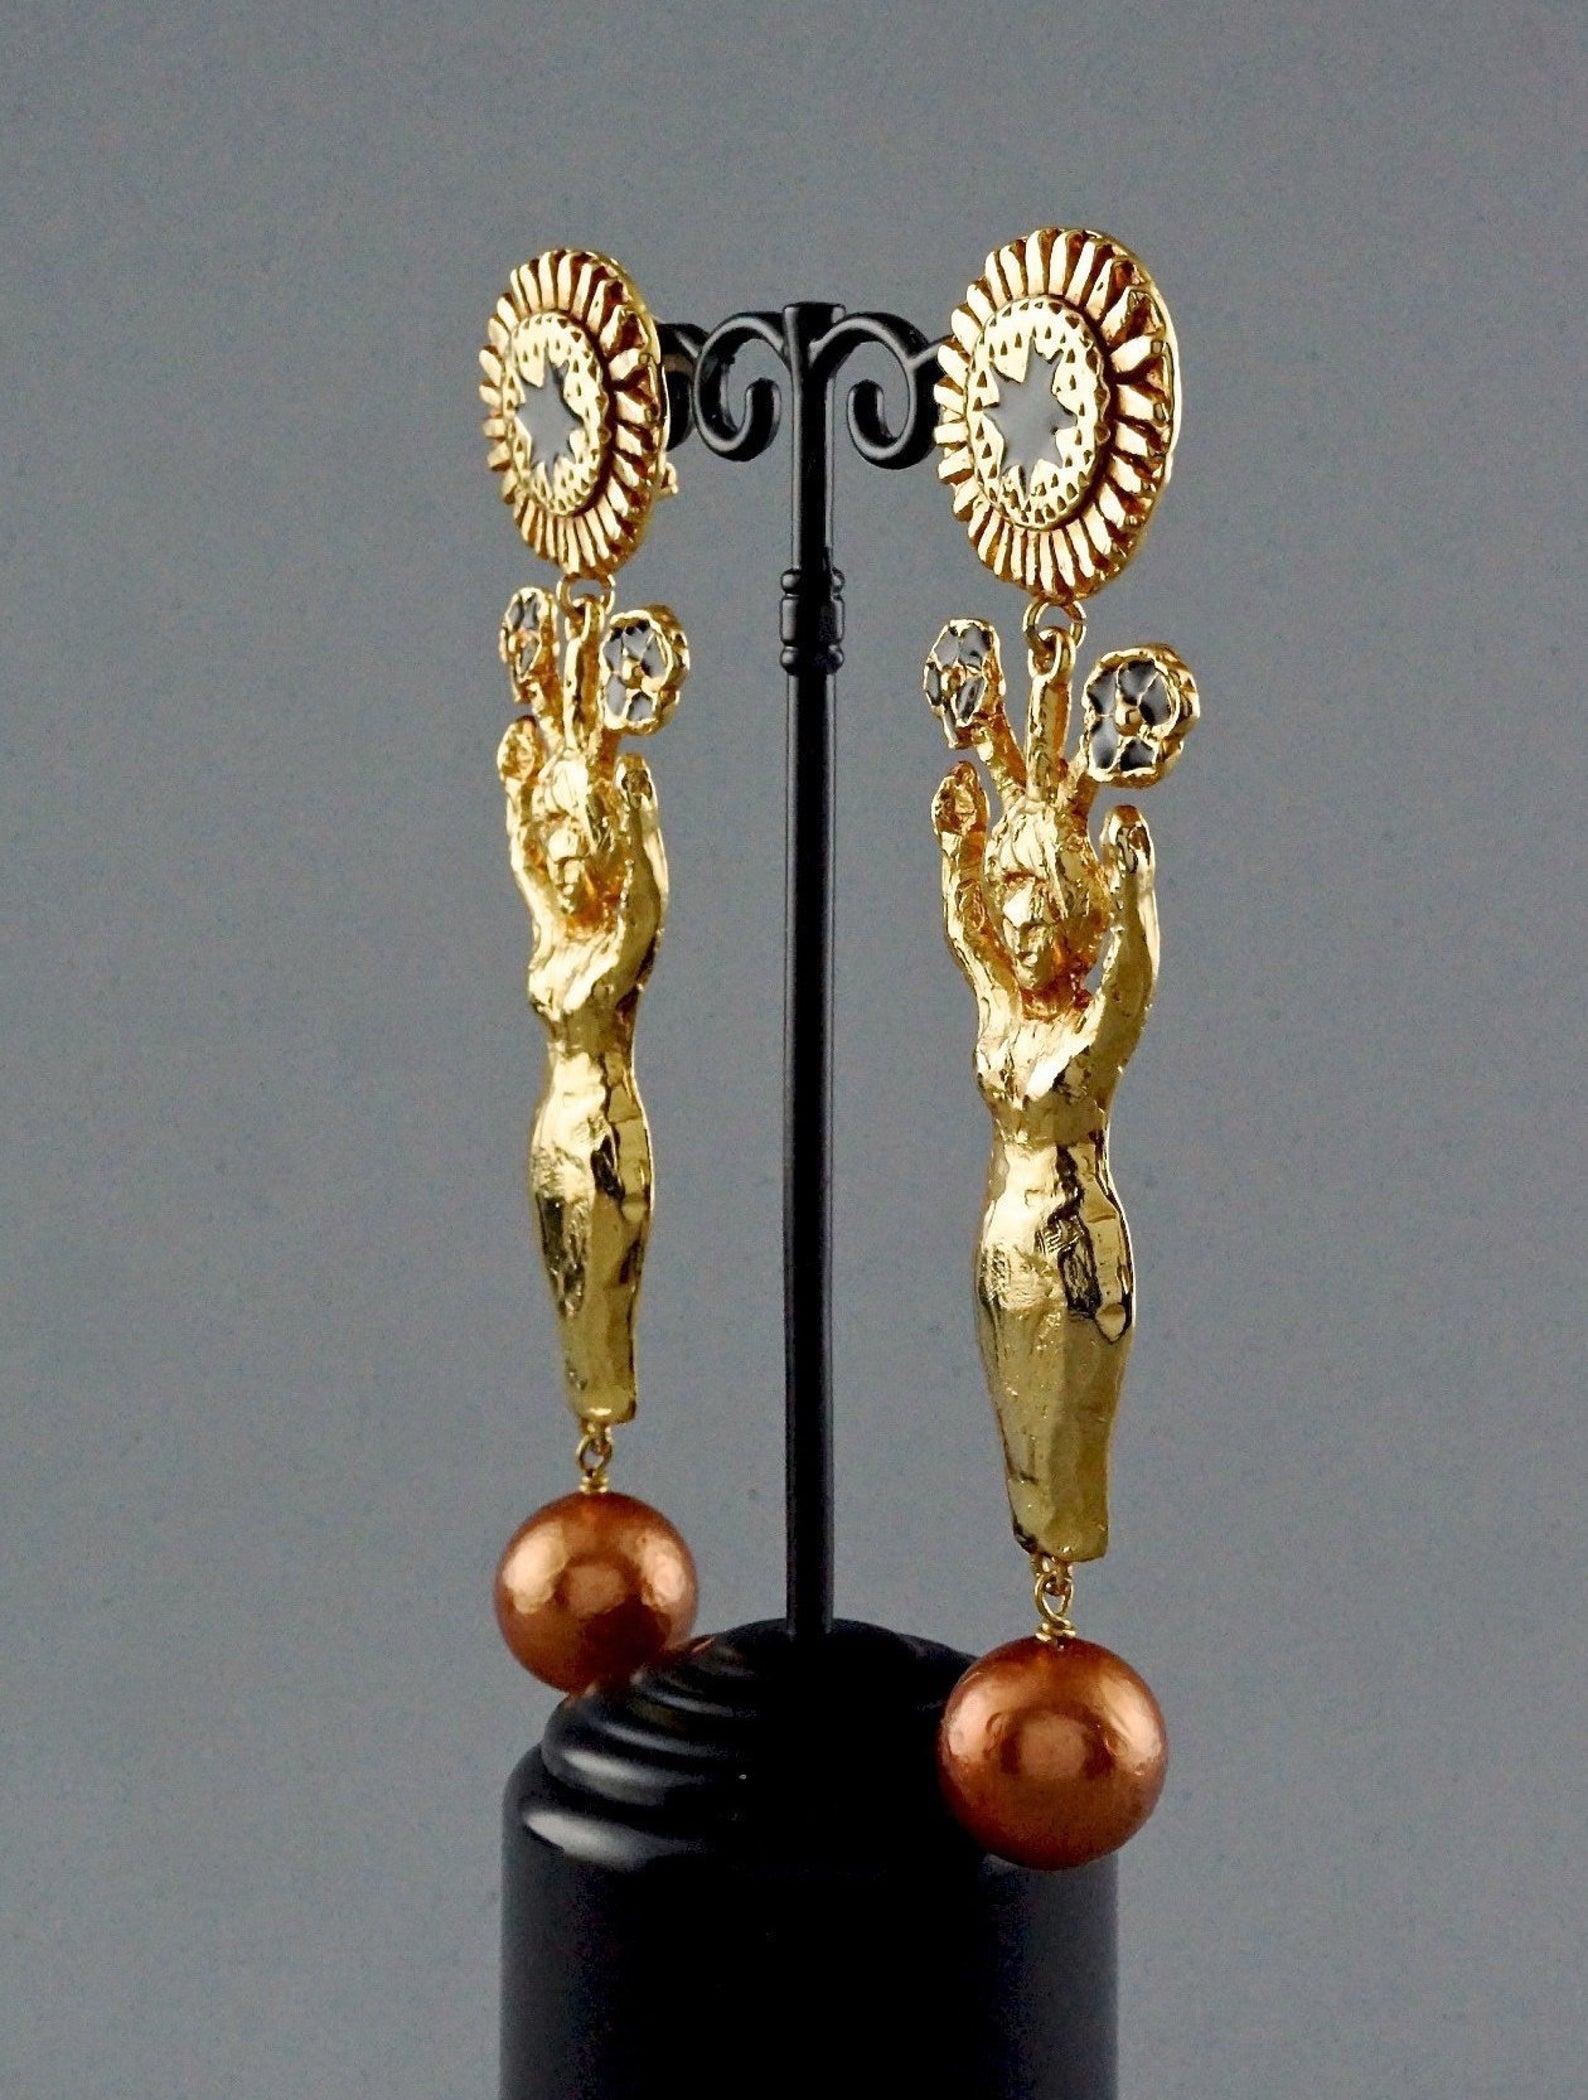 Vintage Runway CHRISTIAN LACROIX Sculptured Figural Woman Enamel Pearl Earrings

Measurements:
Height: 4.92 inches (12.5 cm)
Width: 1.29 inches (3.3 cm)
Weight per Earring: 36 grams

Features:
- 100% Authentic CHRISTIAN LACROIX.
- 3 dimensional